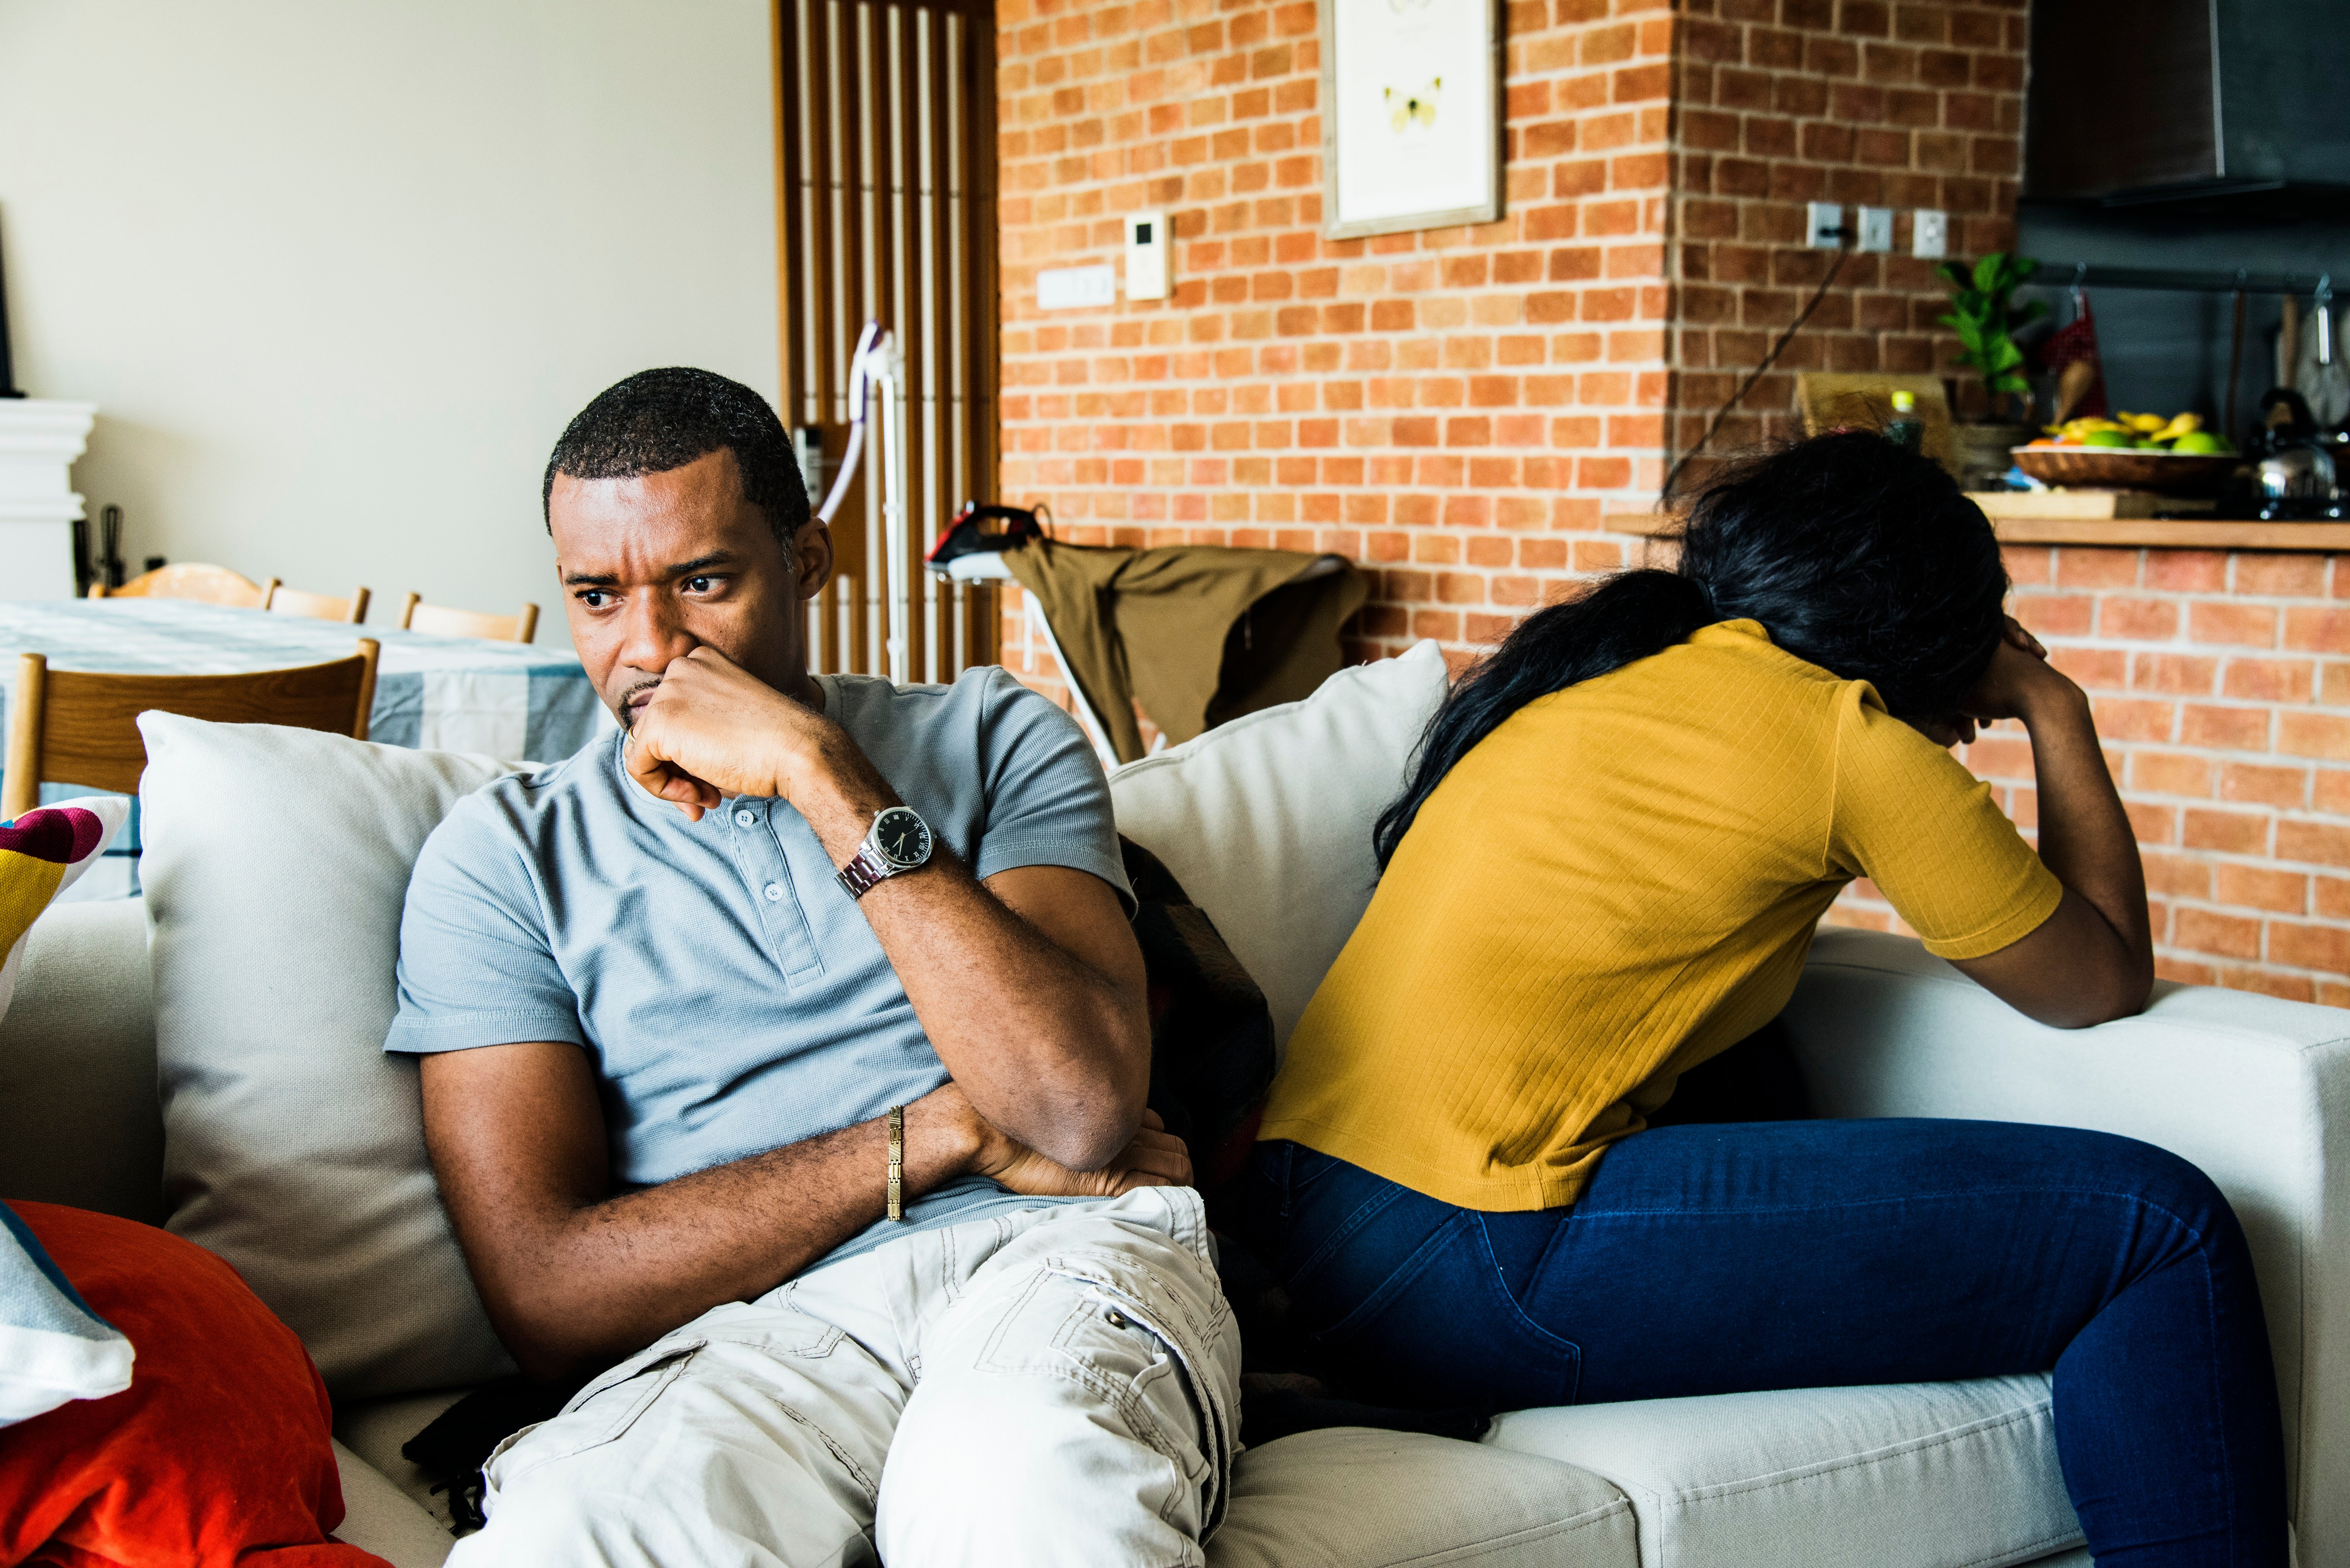 Is It Really Over? 9 Telltale Signs It's Time To Breakup and Move On For Good